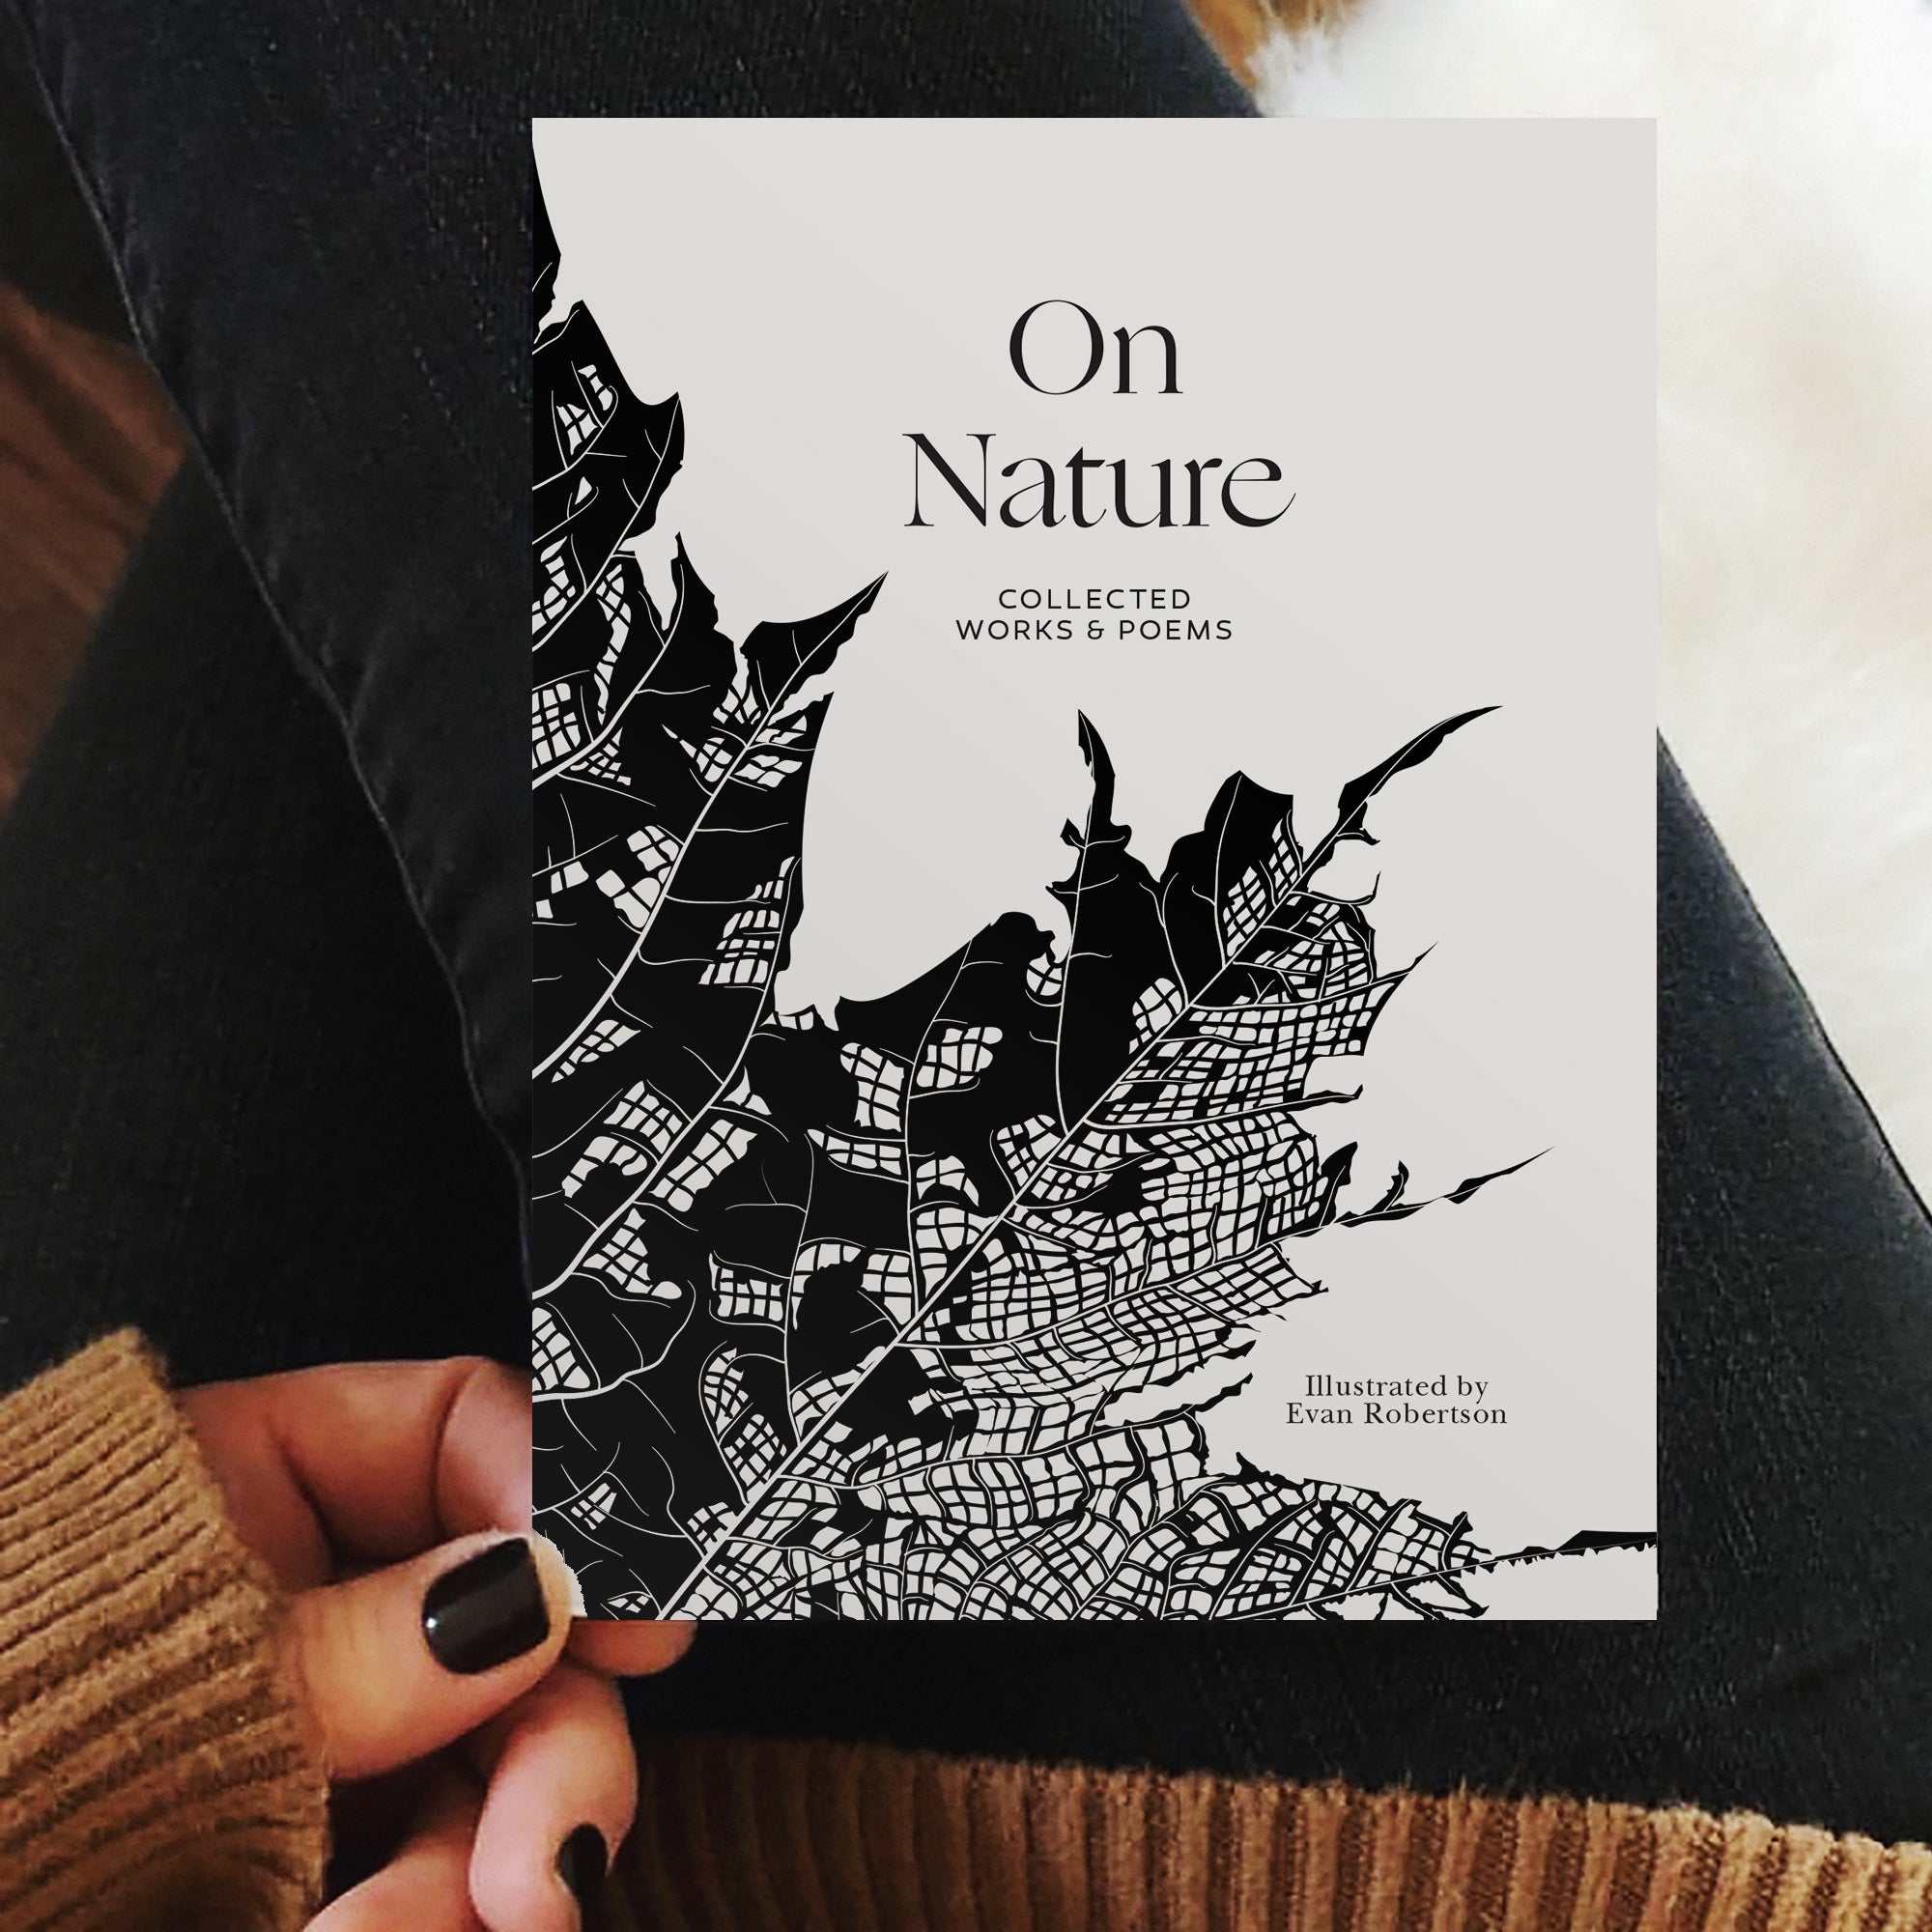 On Nature: Collected Works and Poems (Illustrated)